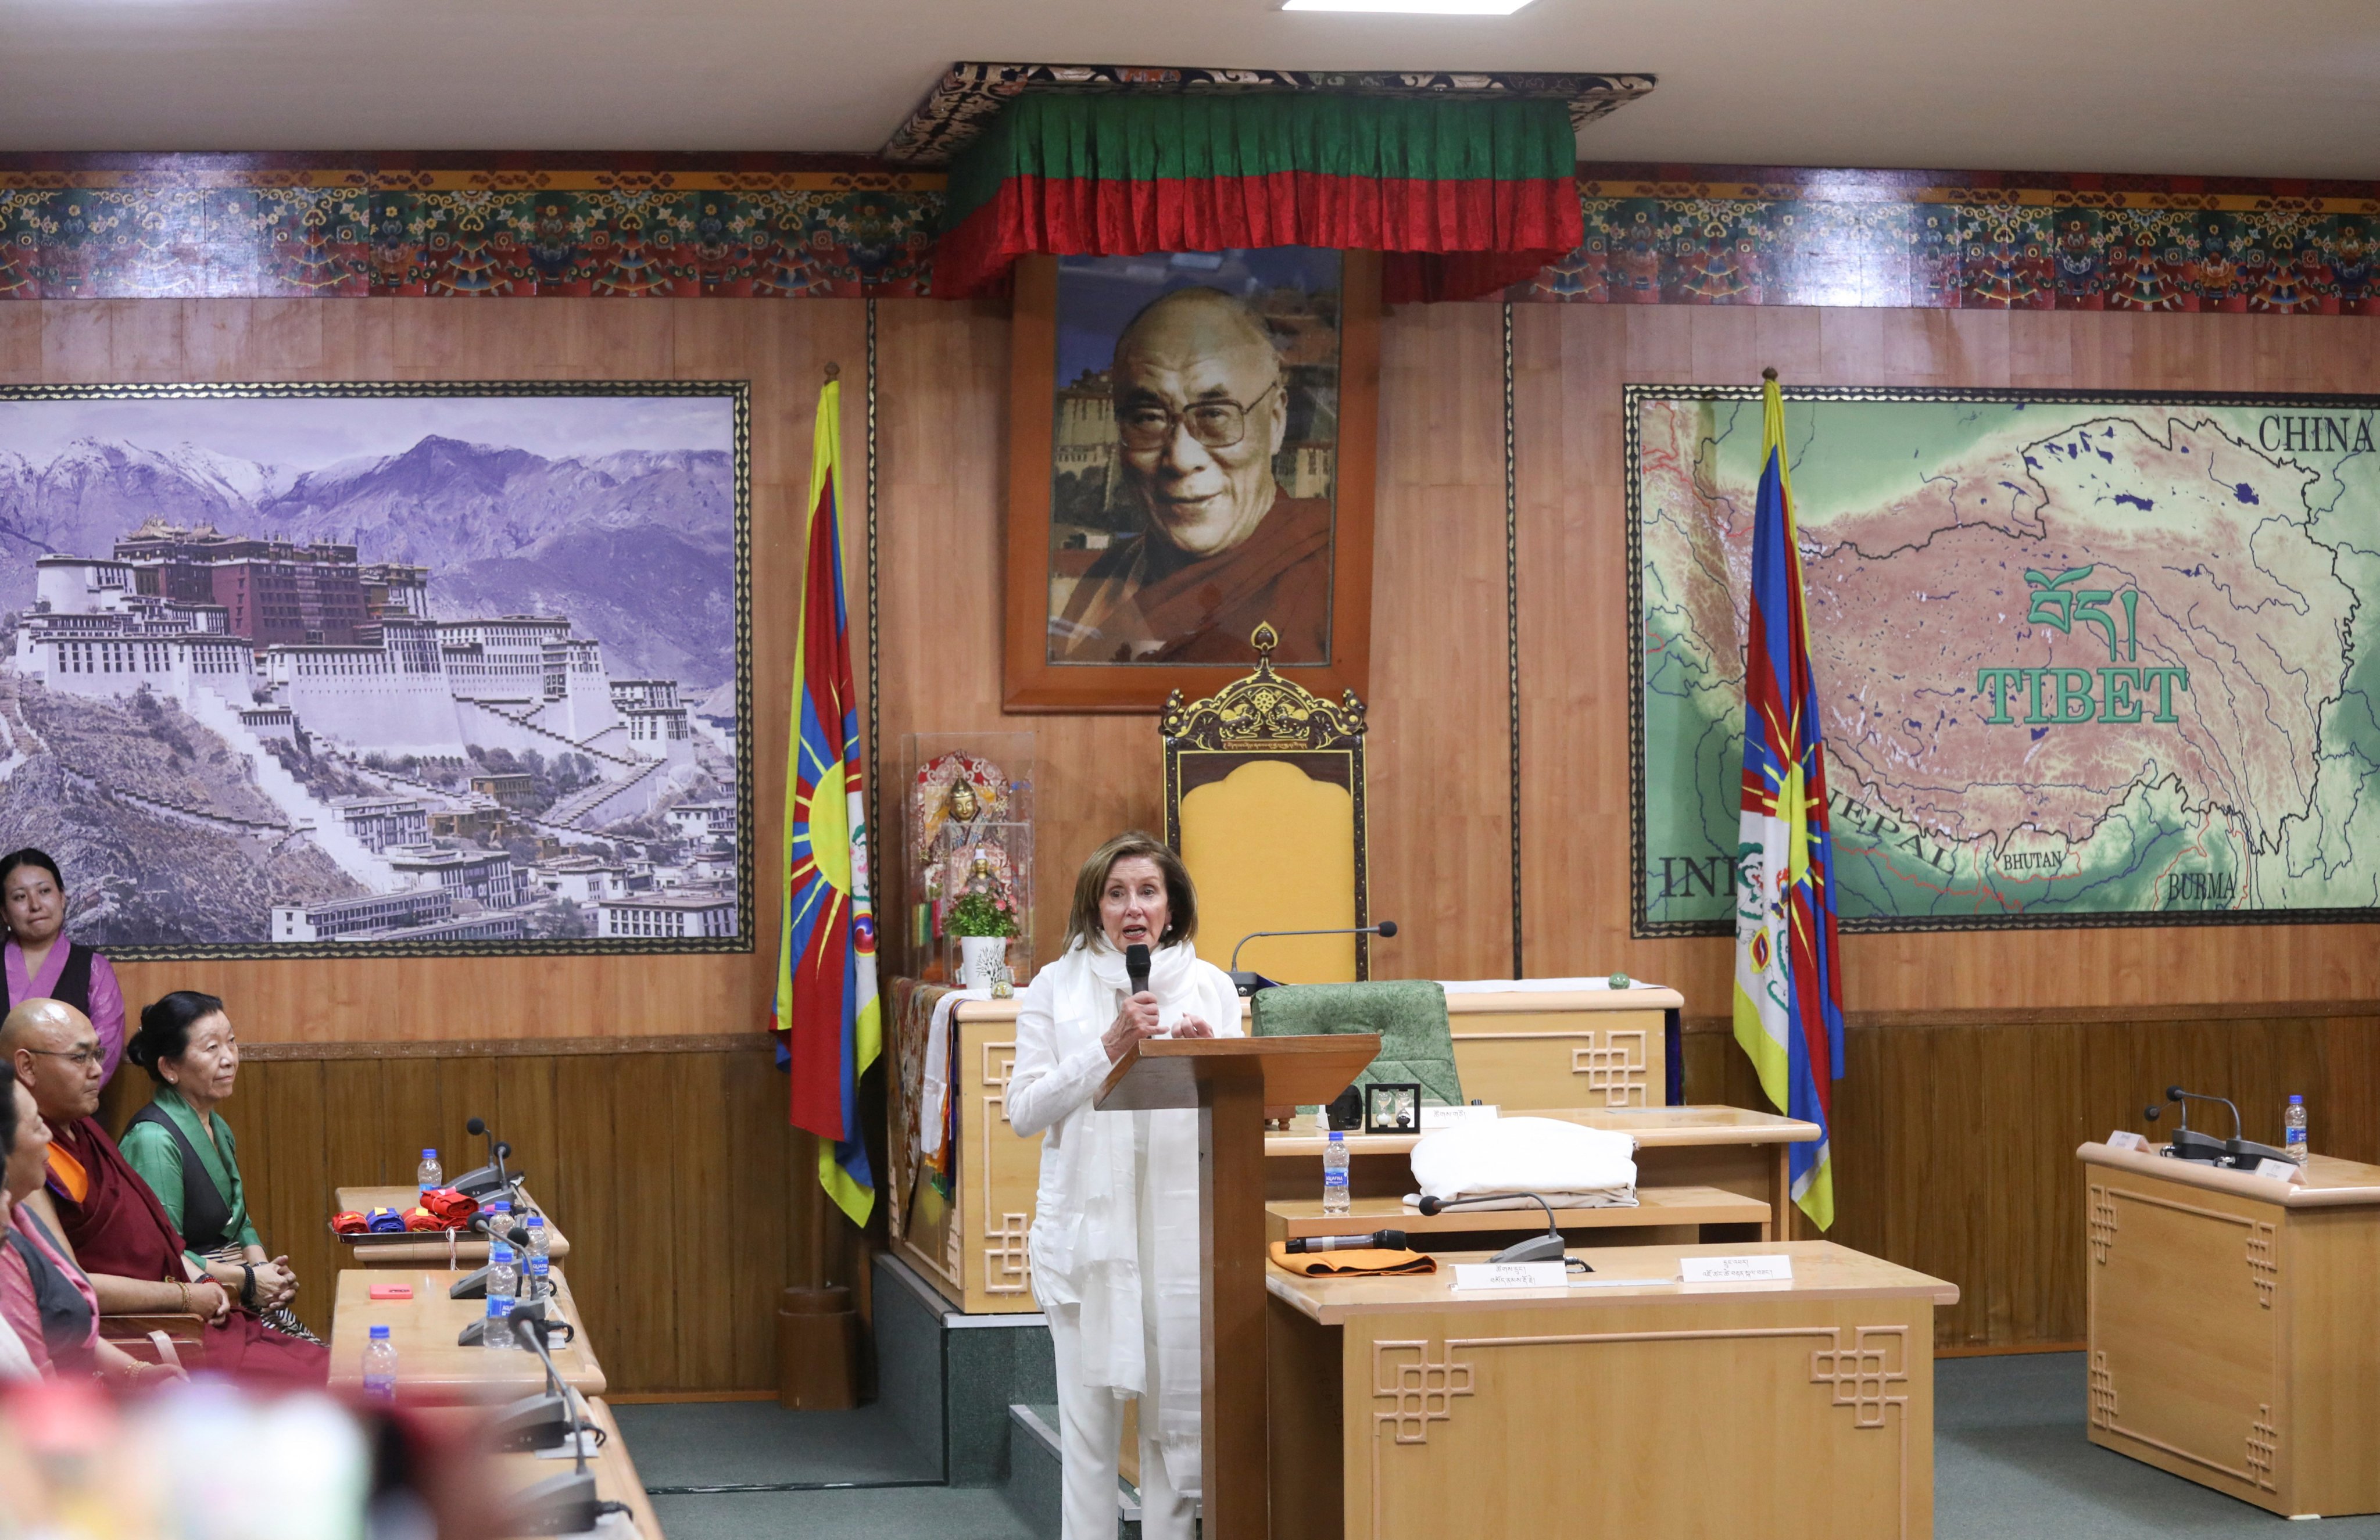 Representative Nancy Pelosi, the former US House speaker, addressing the Tibetan parliament-in-exile at Dharamshala, India on Tuesday. Photo: Reuters